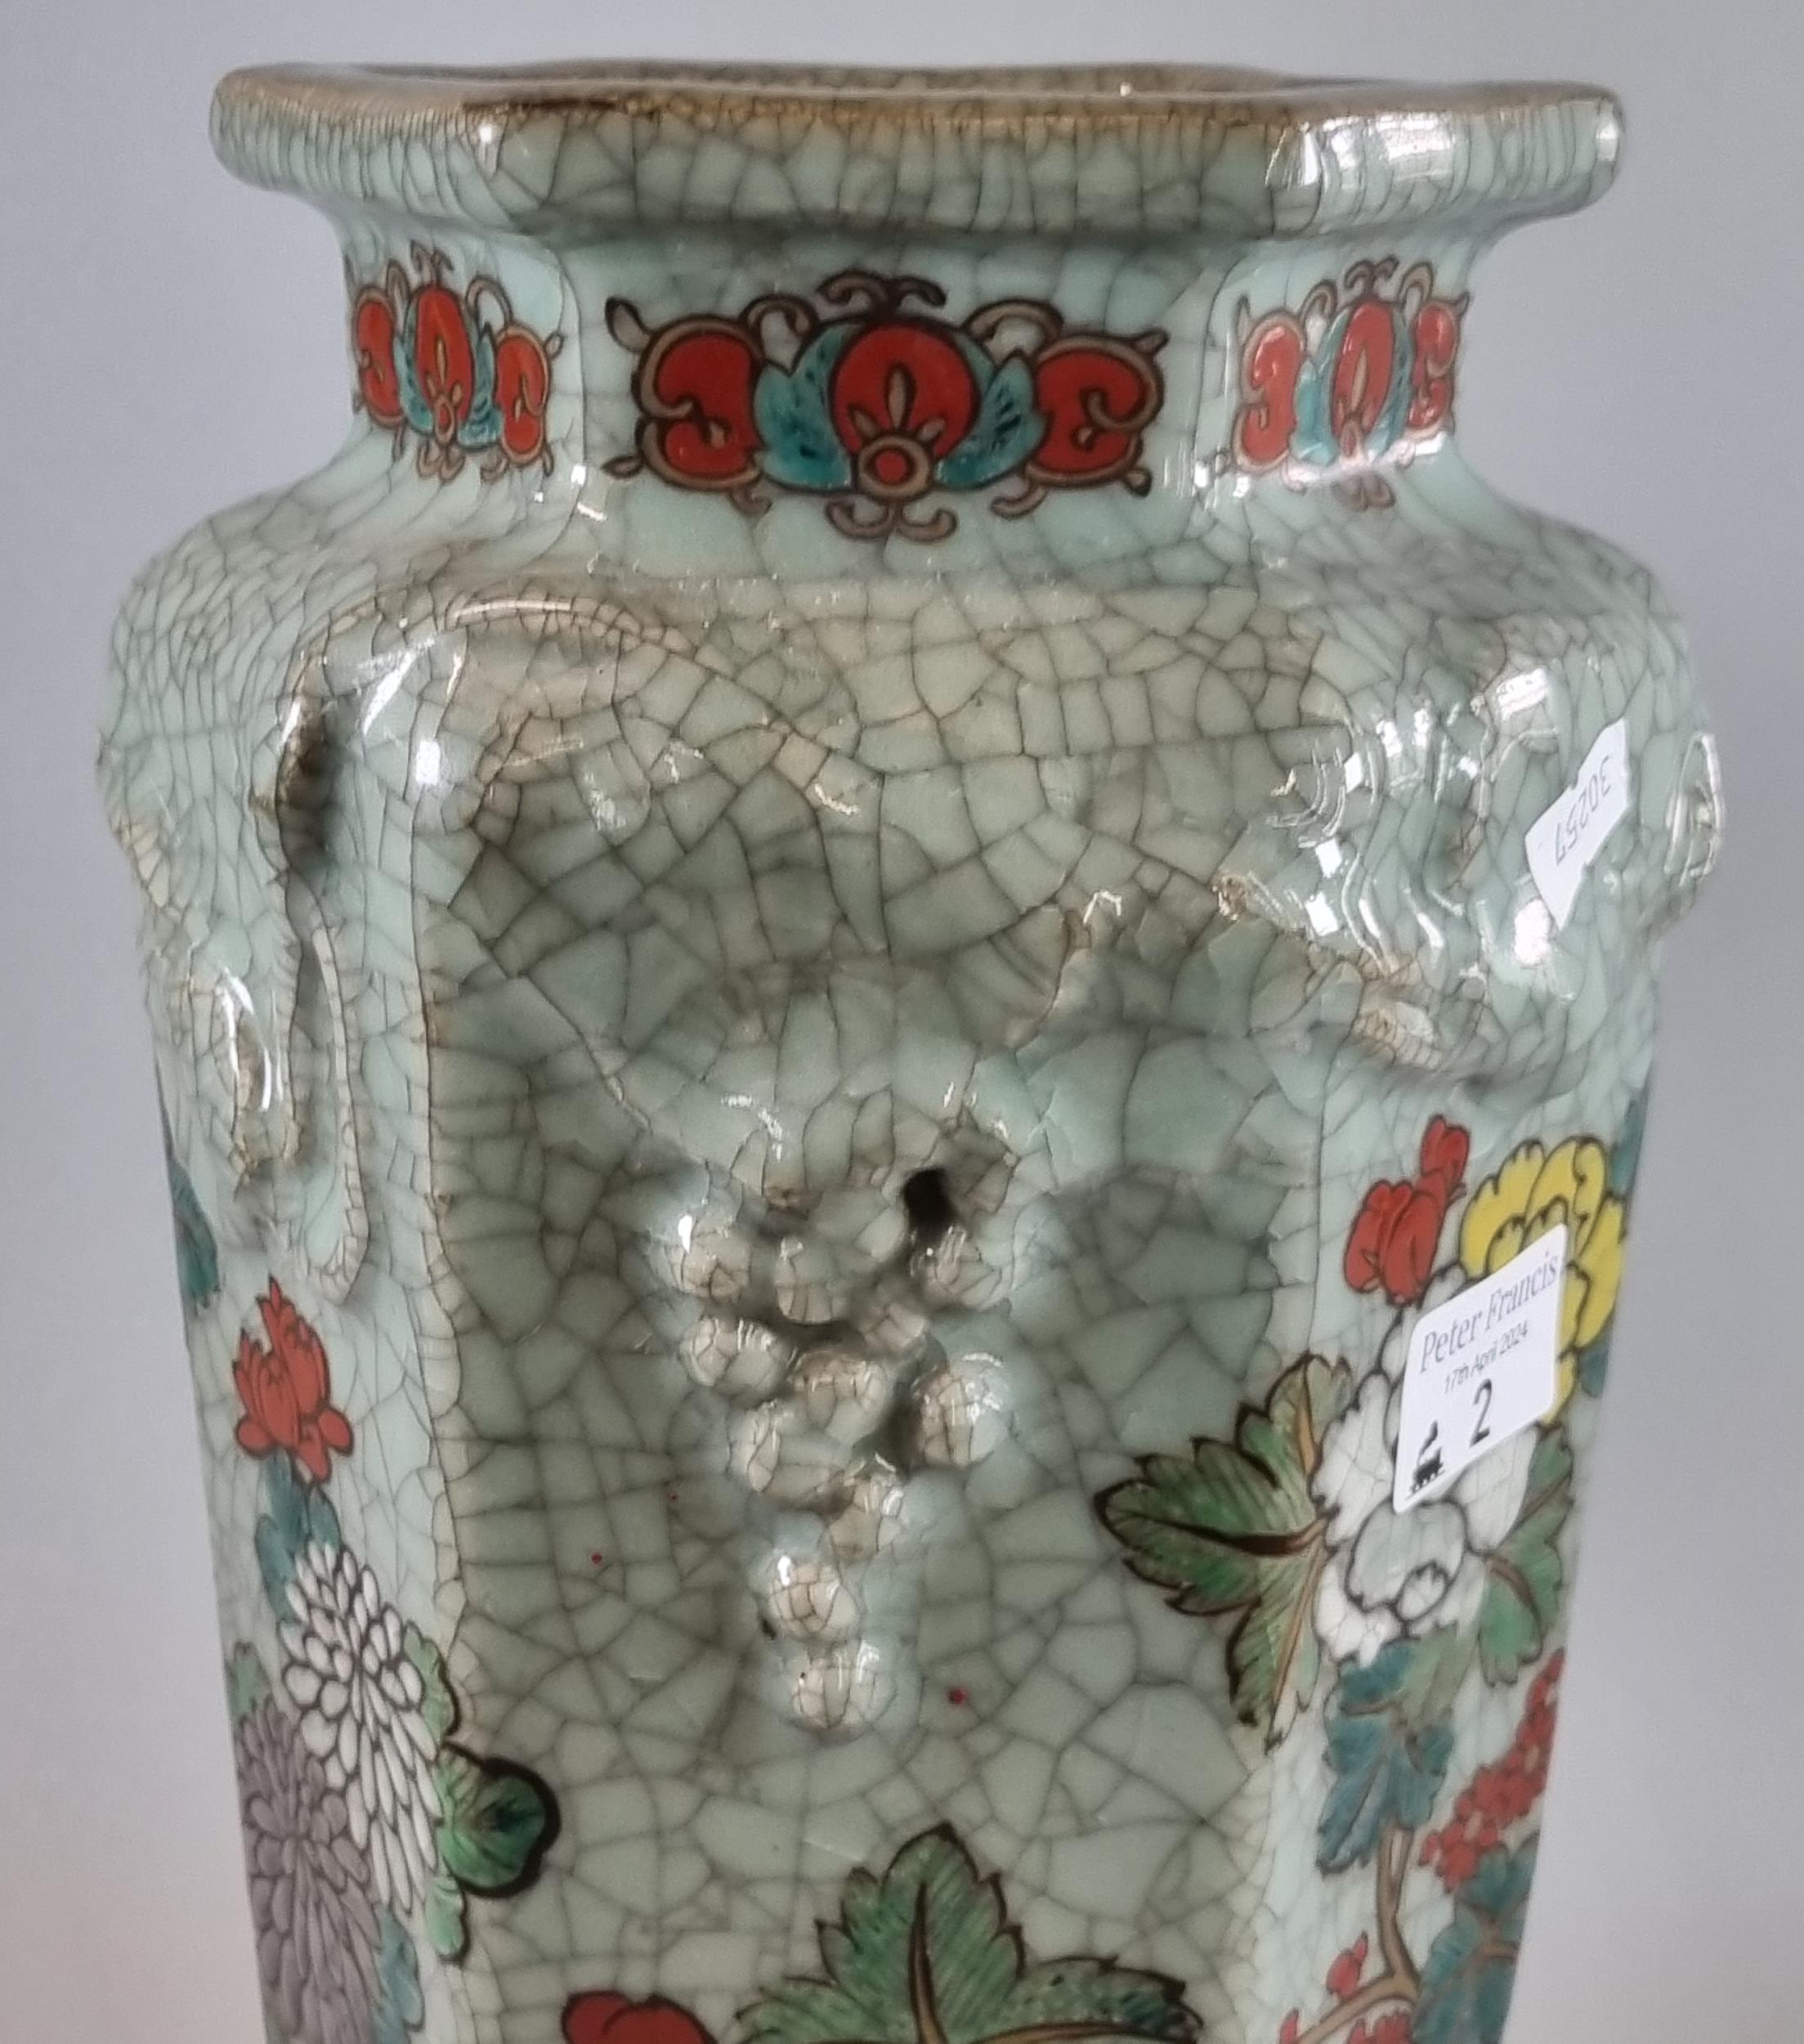 Oriental porcelain hexagonal polychrome vase depicting flowers and foliage on a crackled celadon - Image 3 of 4